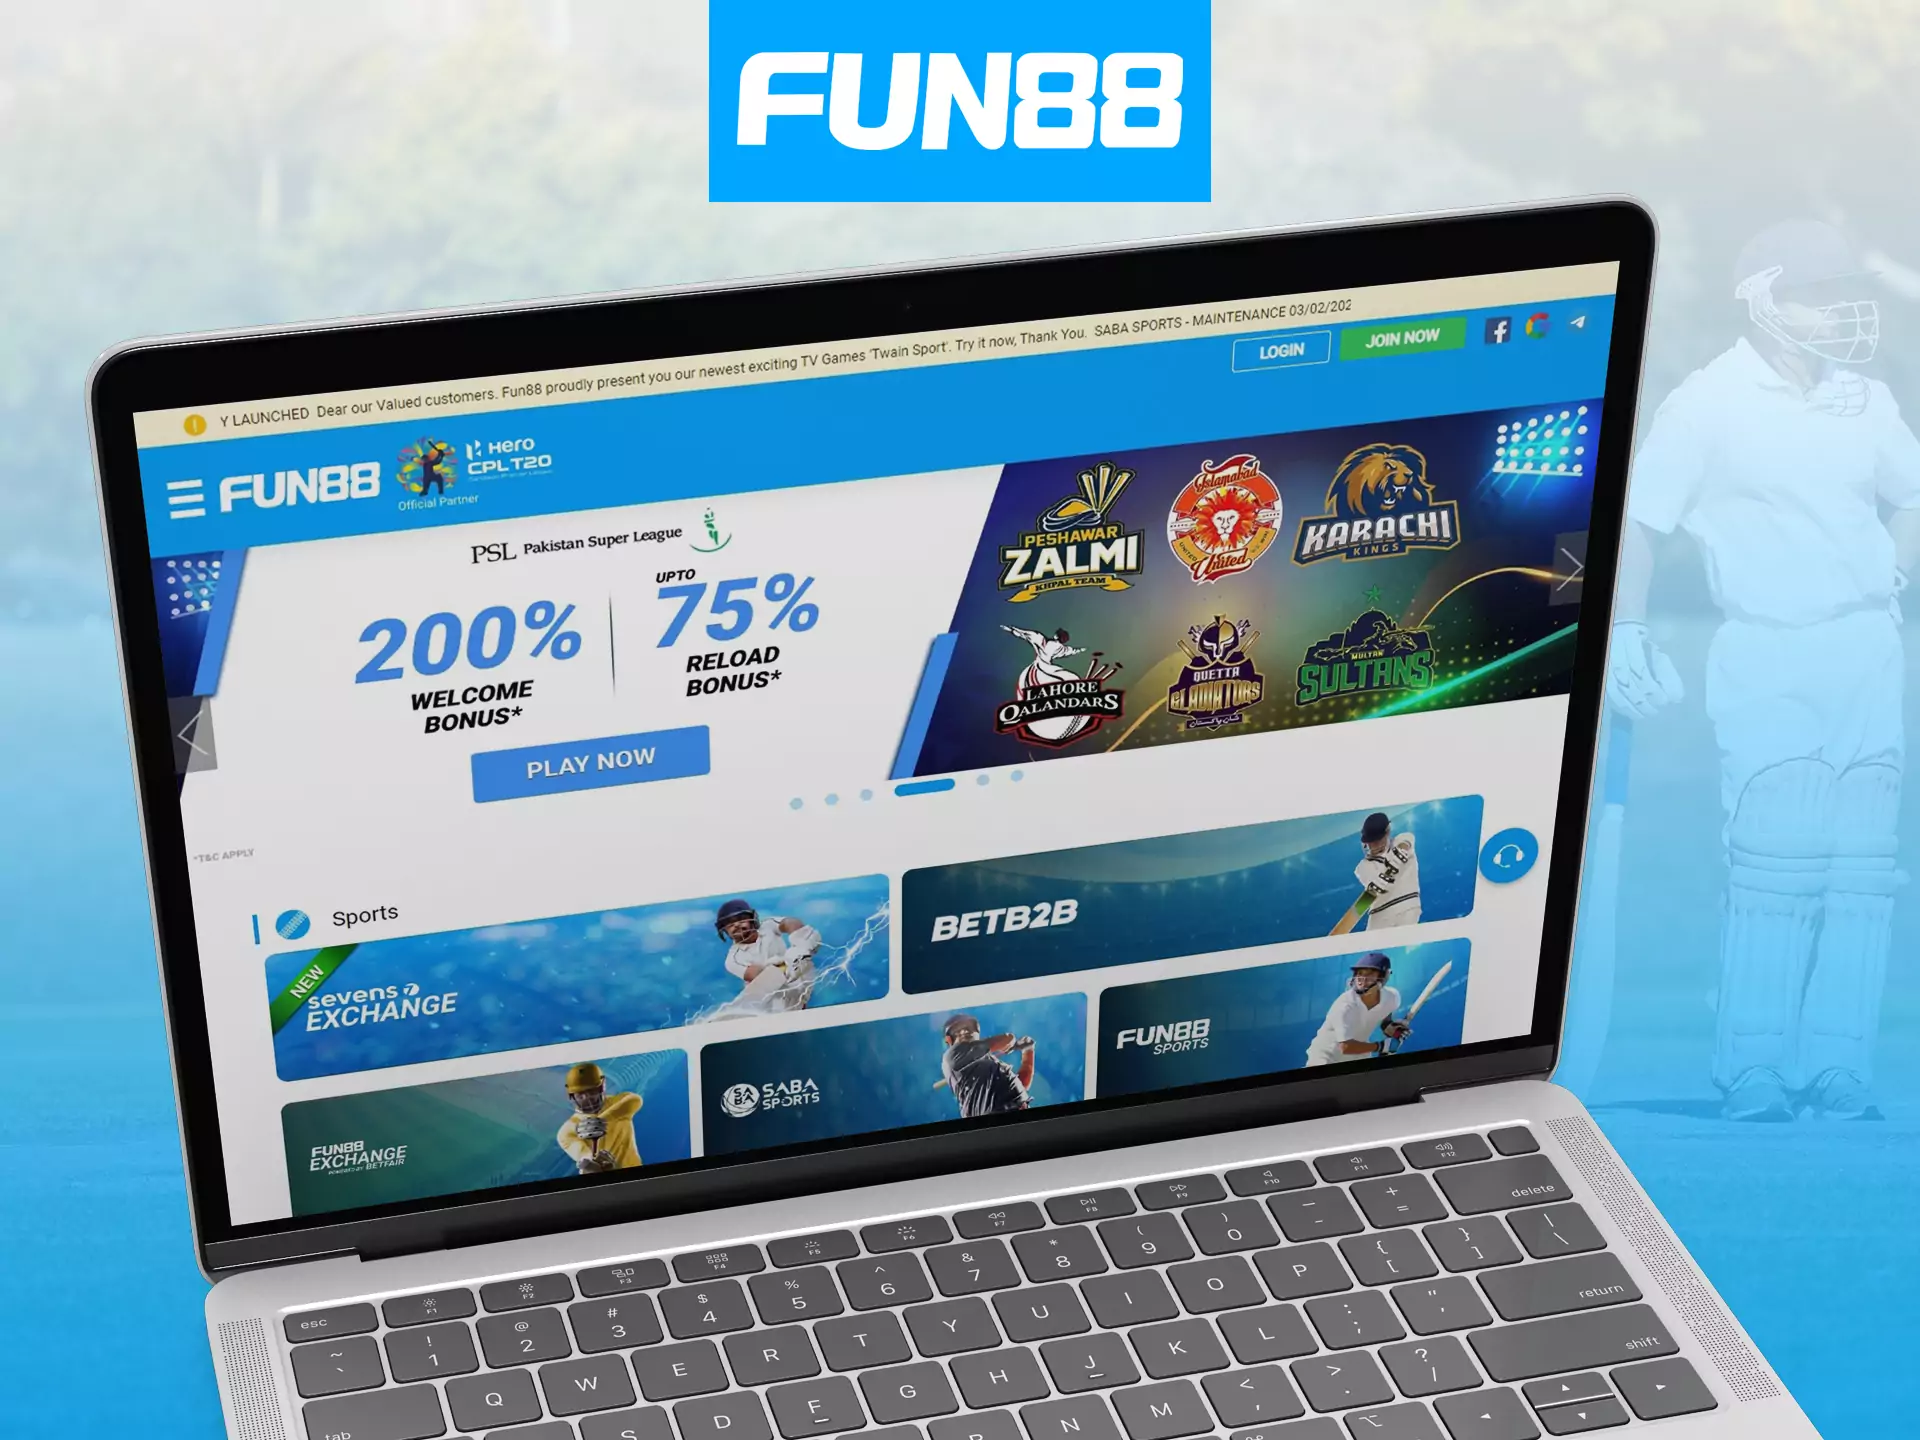 On the official site Fun88 you can bet and play at the casino.